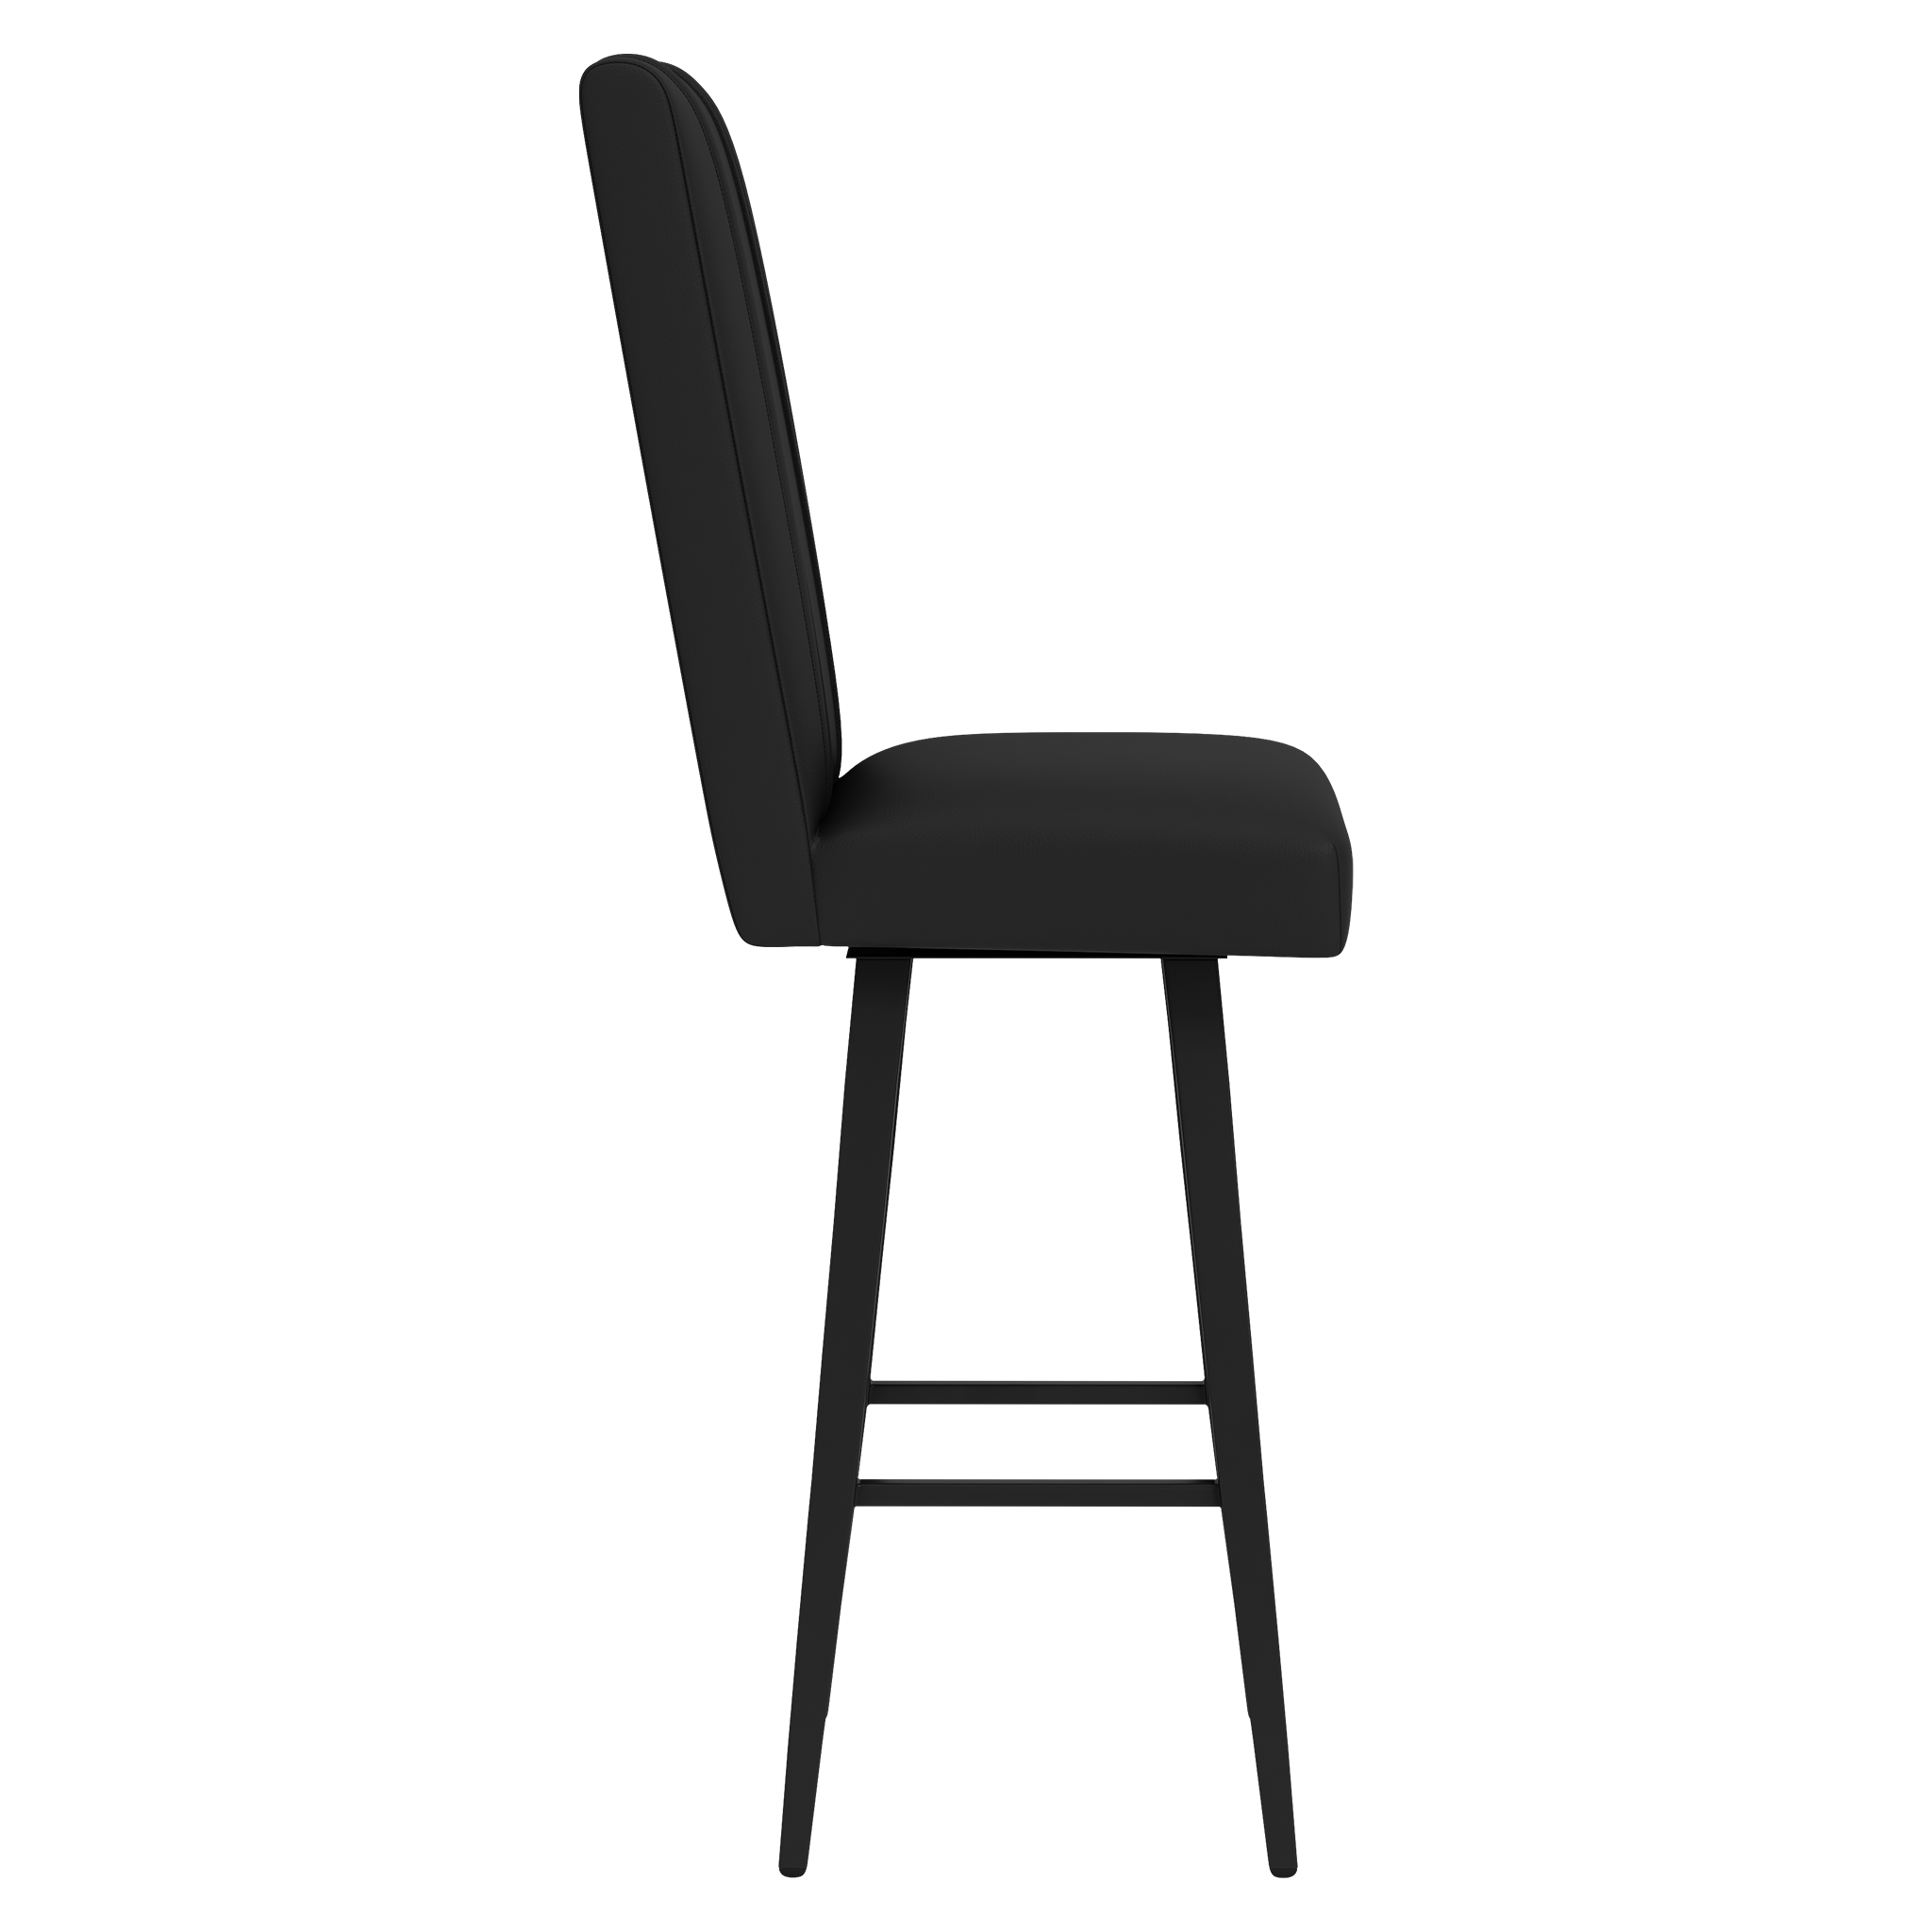 Swivel Bar Stool 2000 with Pittsburgh Pirates Cooperstown